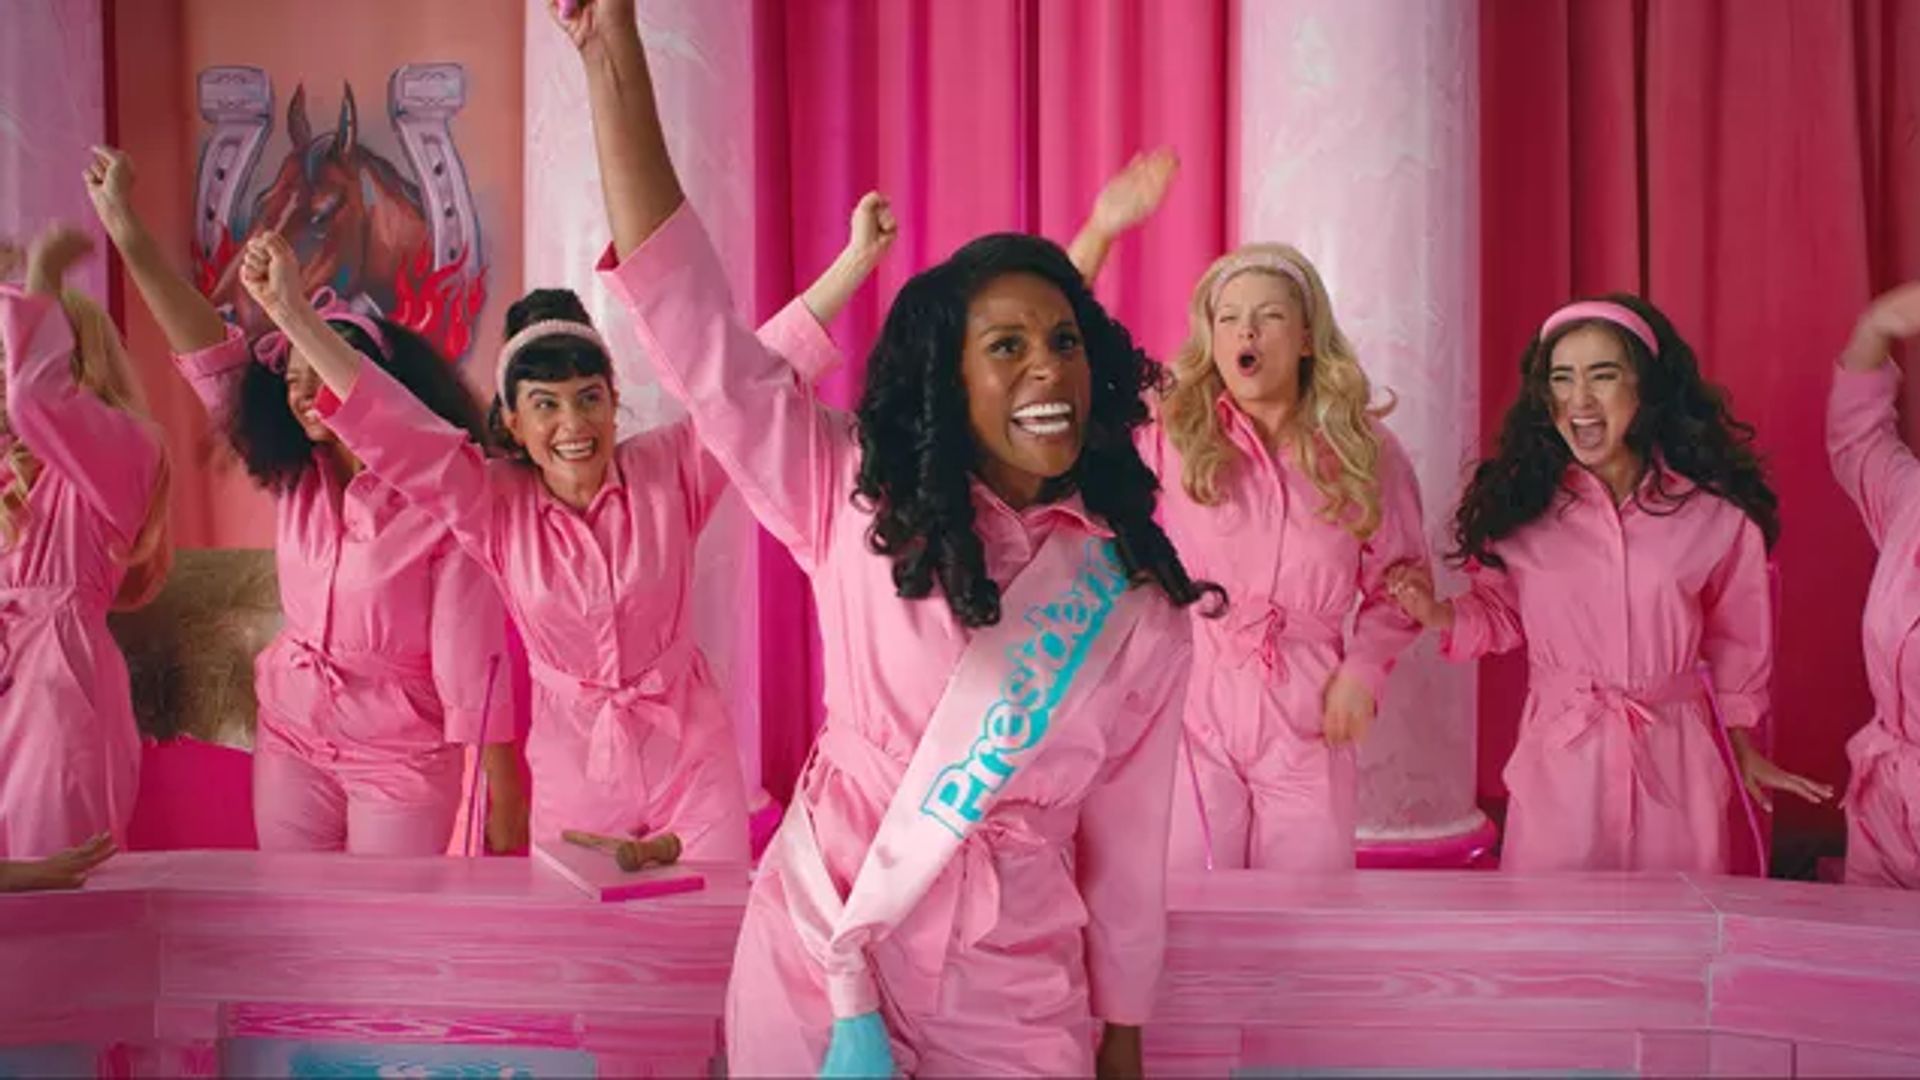 Issa Rae and other barbies wear pink boiler suits